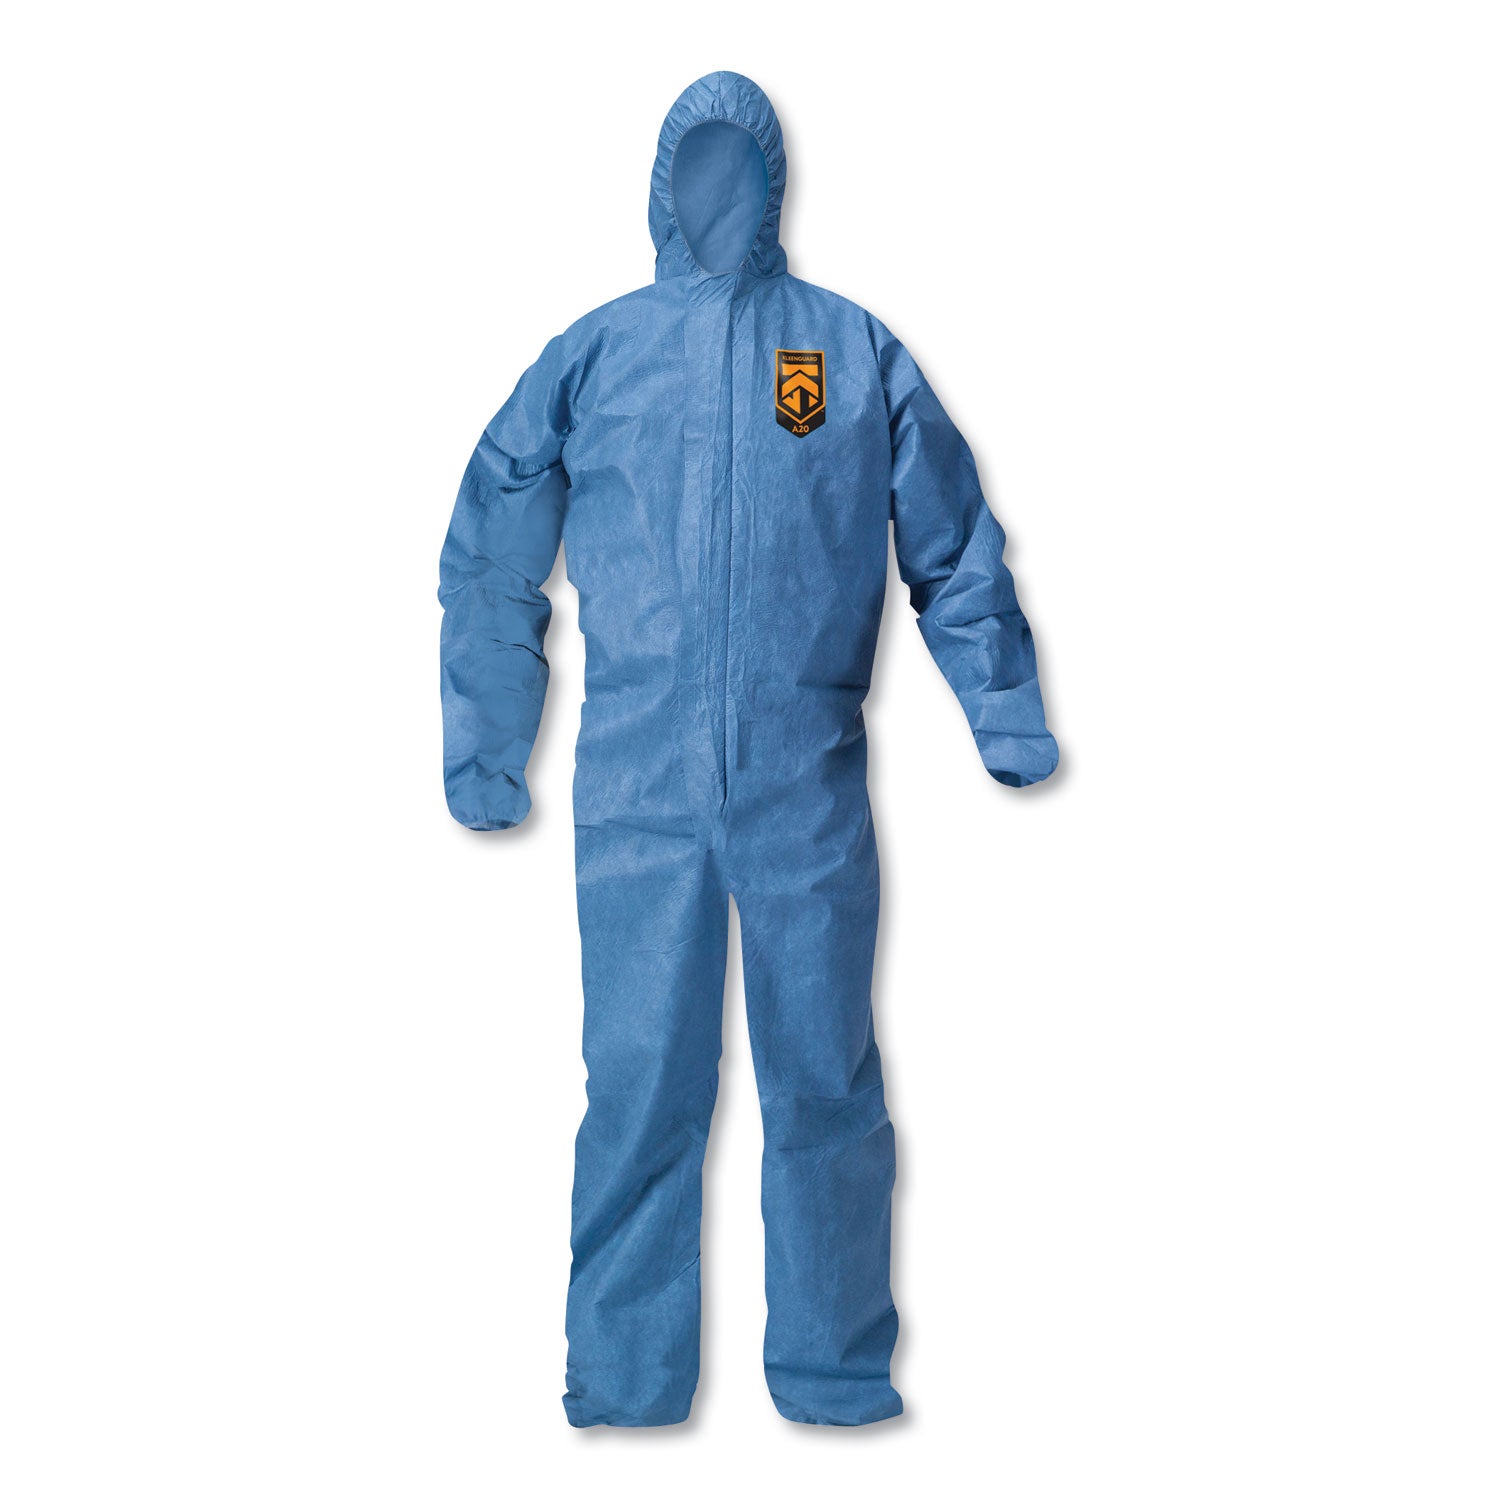 a20-elastic-back-wrist-ankle-hooded-coveralls-large-blue-24-carton_kcc58513 - 1